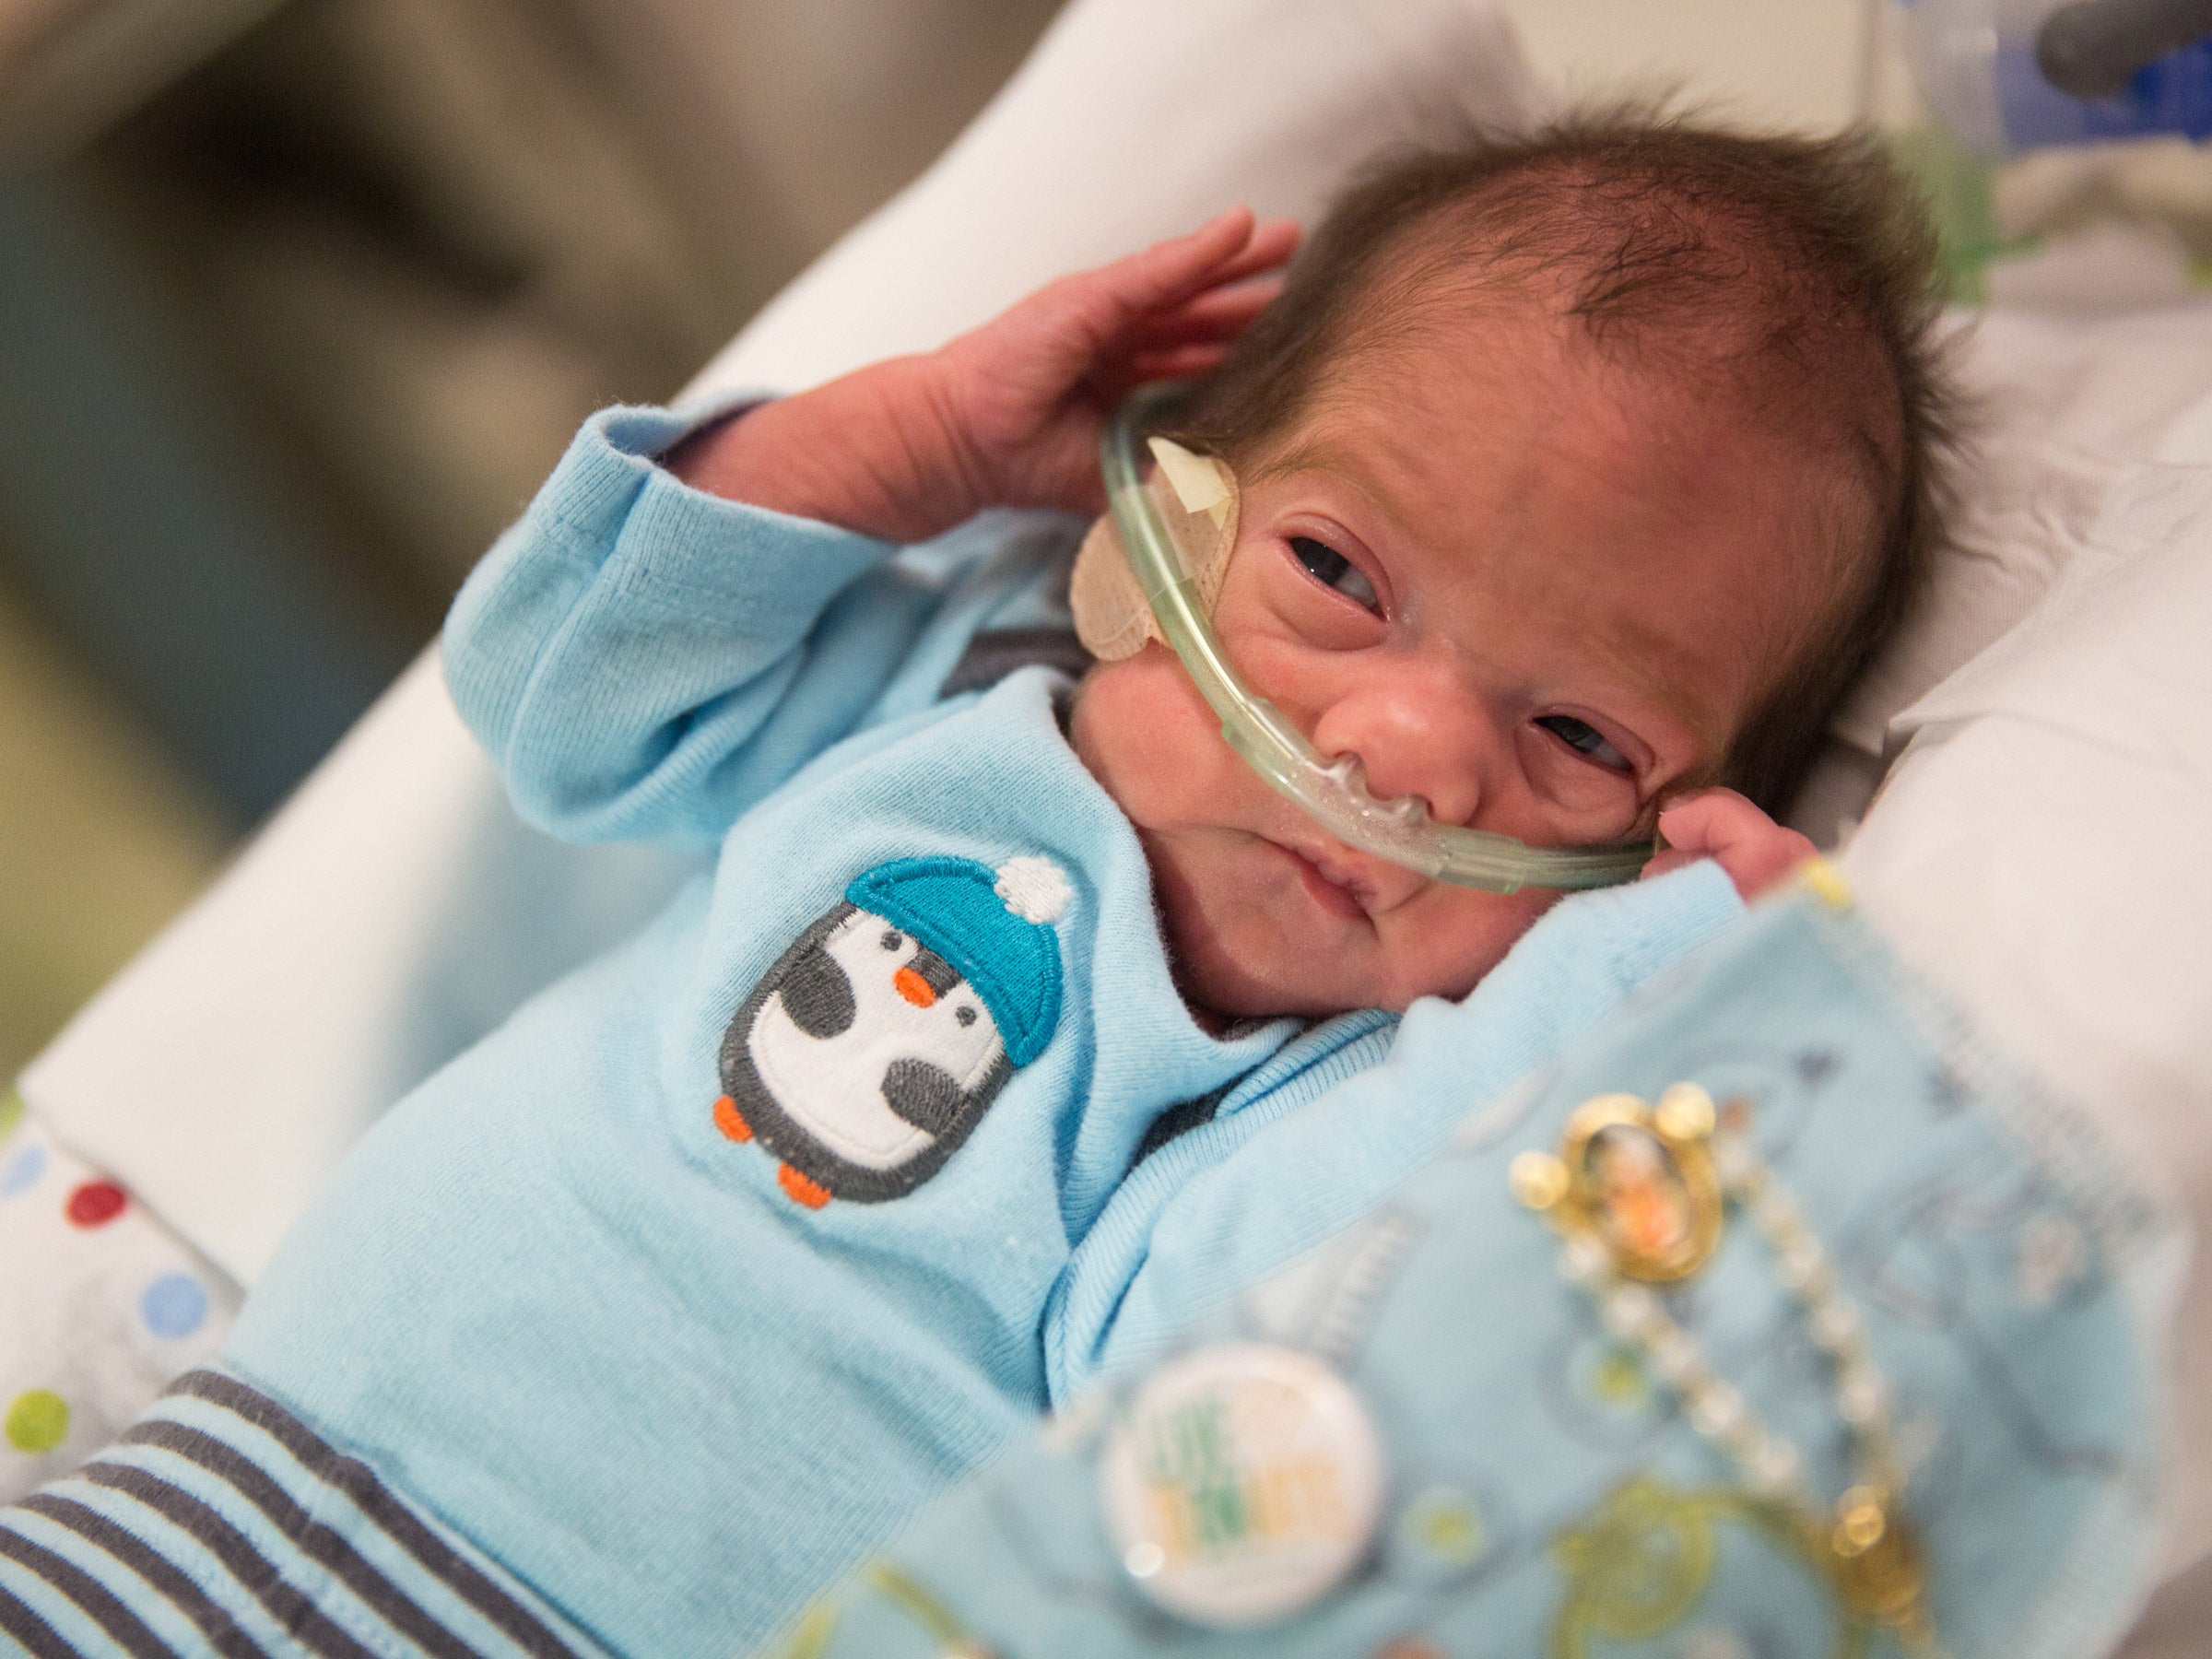 Angel Perez was born seven weeks after his mother was declared brain dead